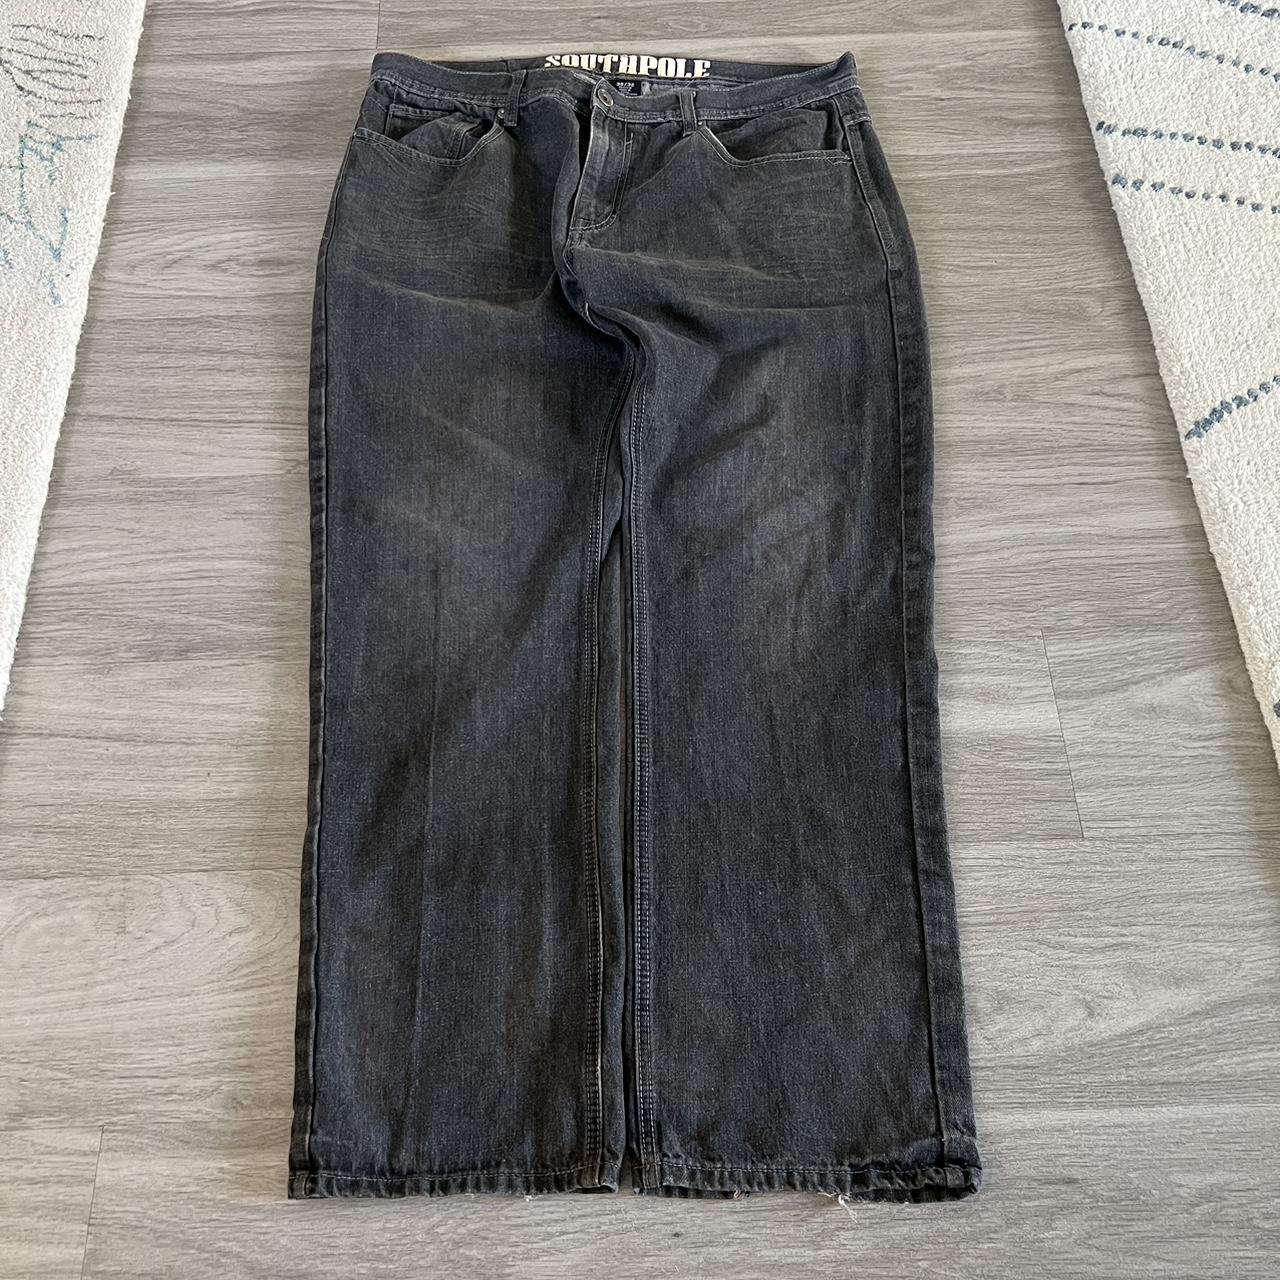 Sick Southpole Jeans with nice fade Faded nicely,... - Depop